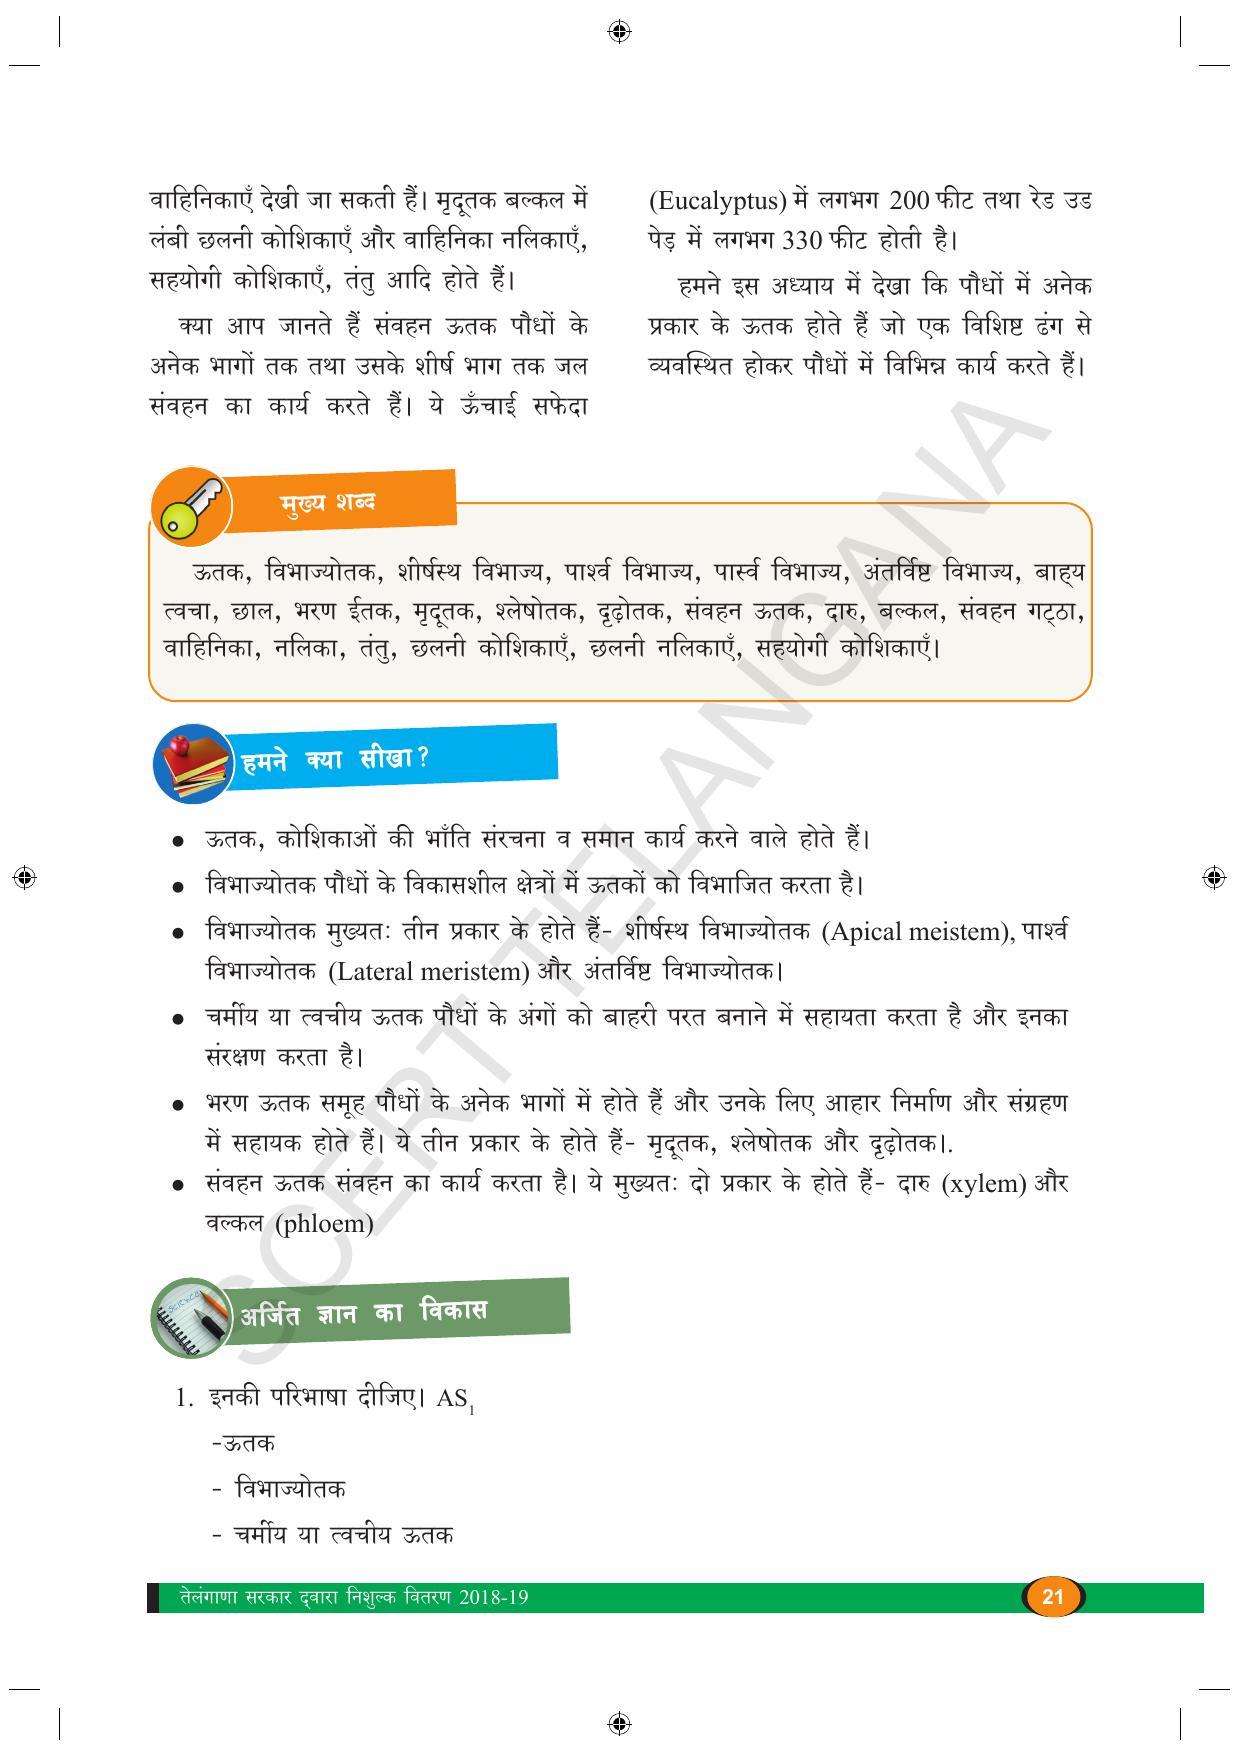 TS SCERT Class 9 Biological Science (Hindi Medium) Text Book - Page 33